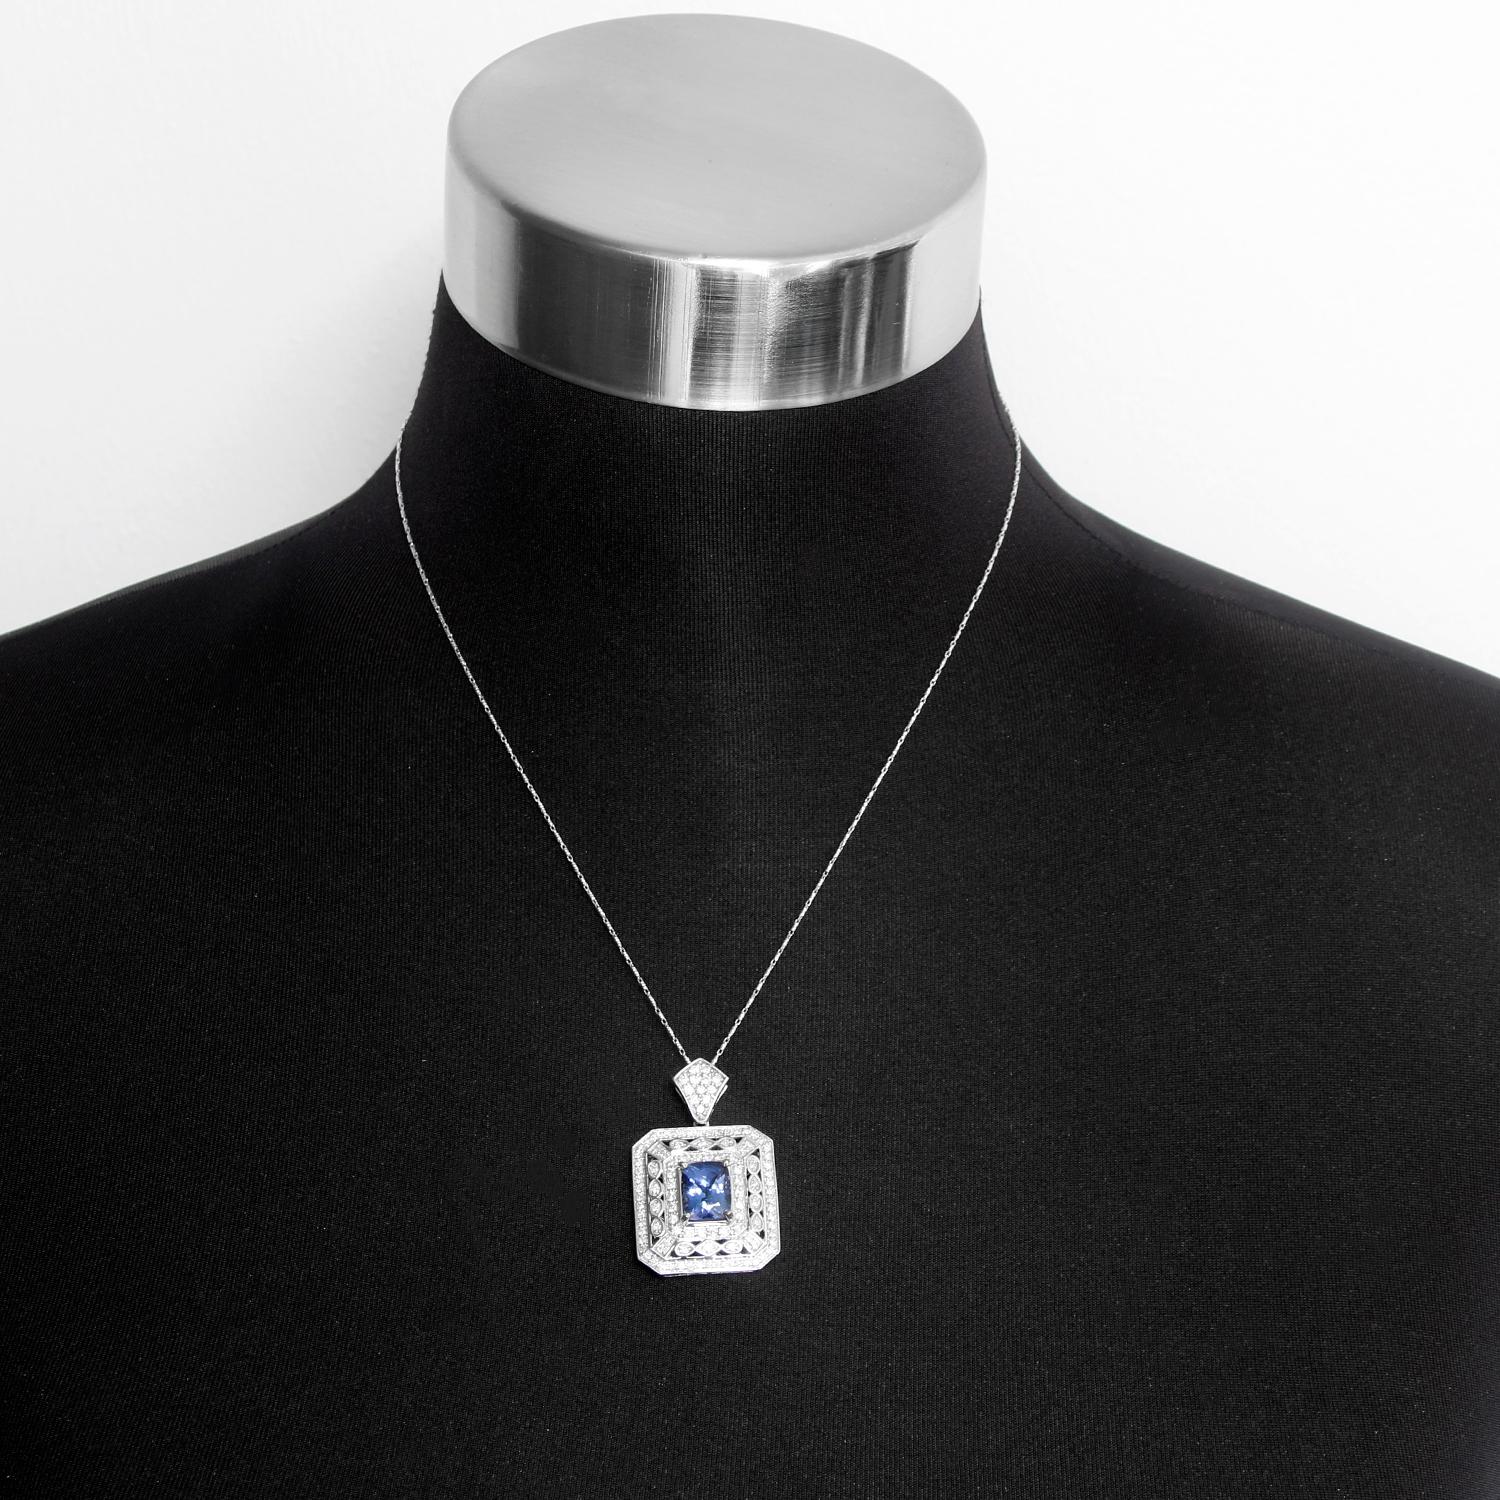 Gorgeous White Gold Diamond and Tanzanite Pendant Necklace - This gorgeous necklace is 18 inches long and has approx 5.30 total carat weight. The pendant is 1.5 inches by 1 inch and has a blue tanzanite measuring 10x8.34x6.4mm that is surrounded by